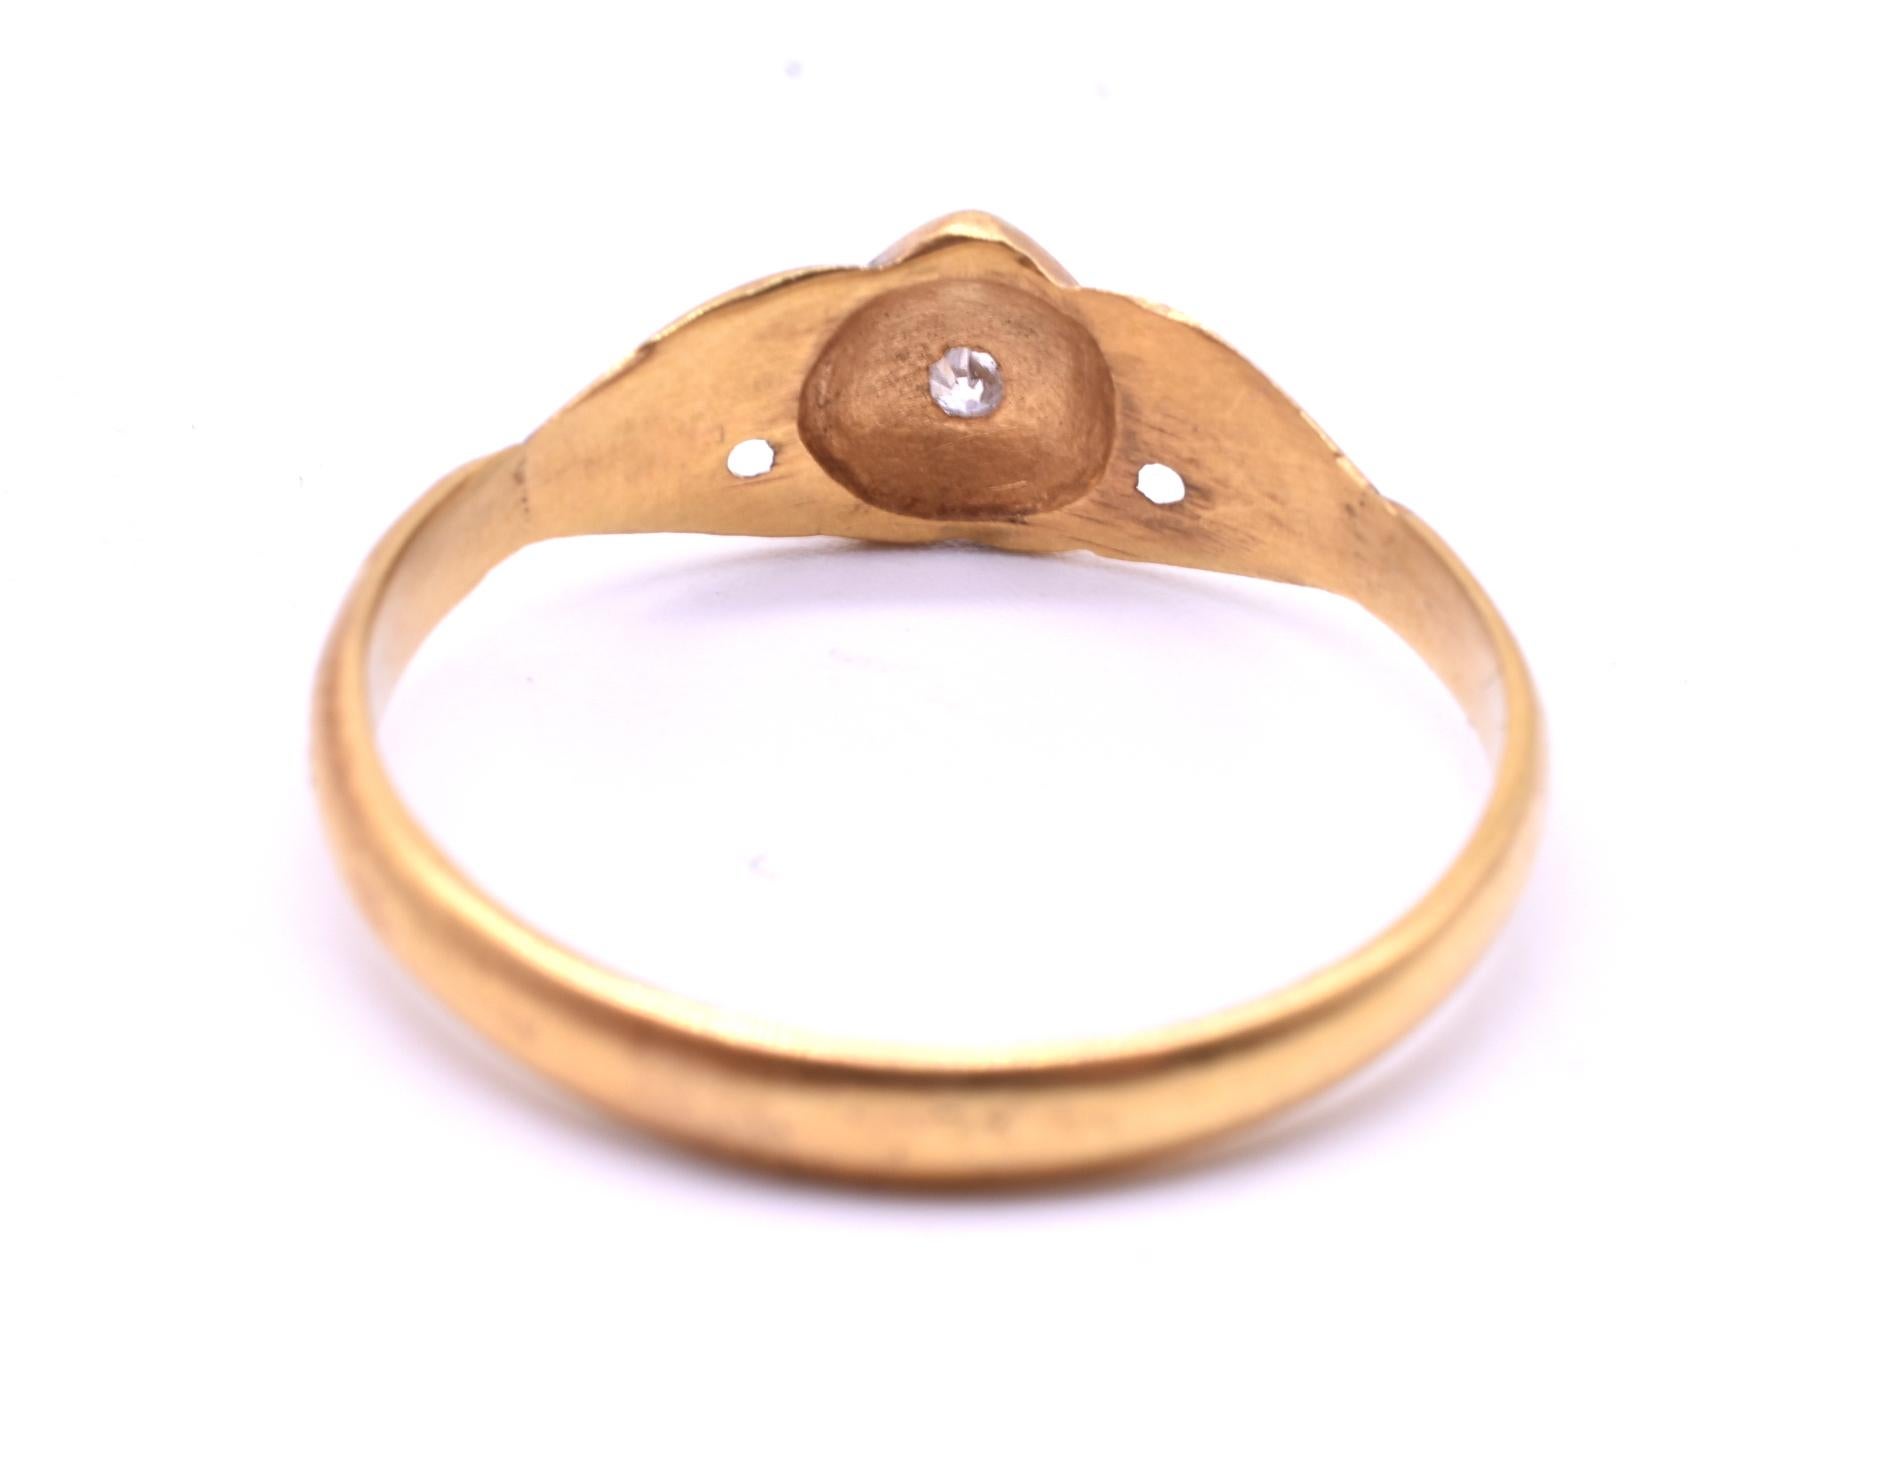 15K gold fede or love ring with two hands coming together to enclose a gold heart with a single rose-cut diamond embedded in a carved star at the center. The word 